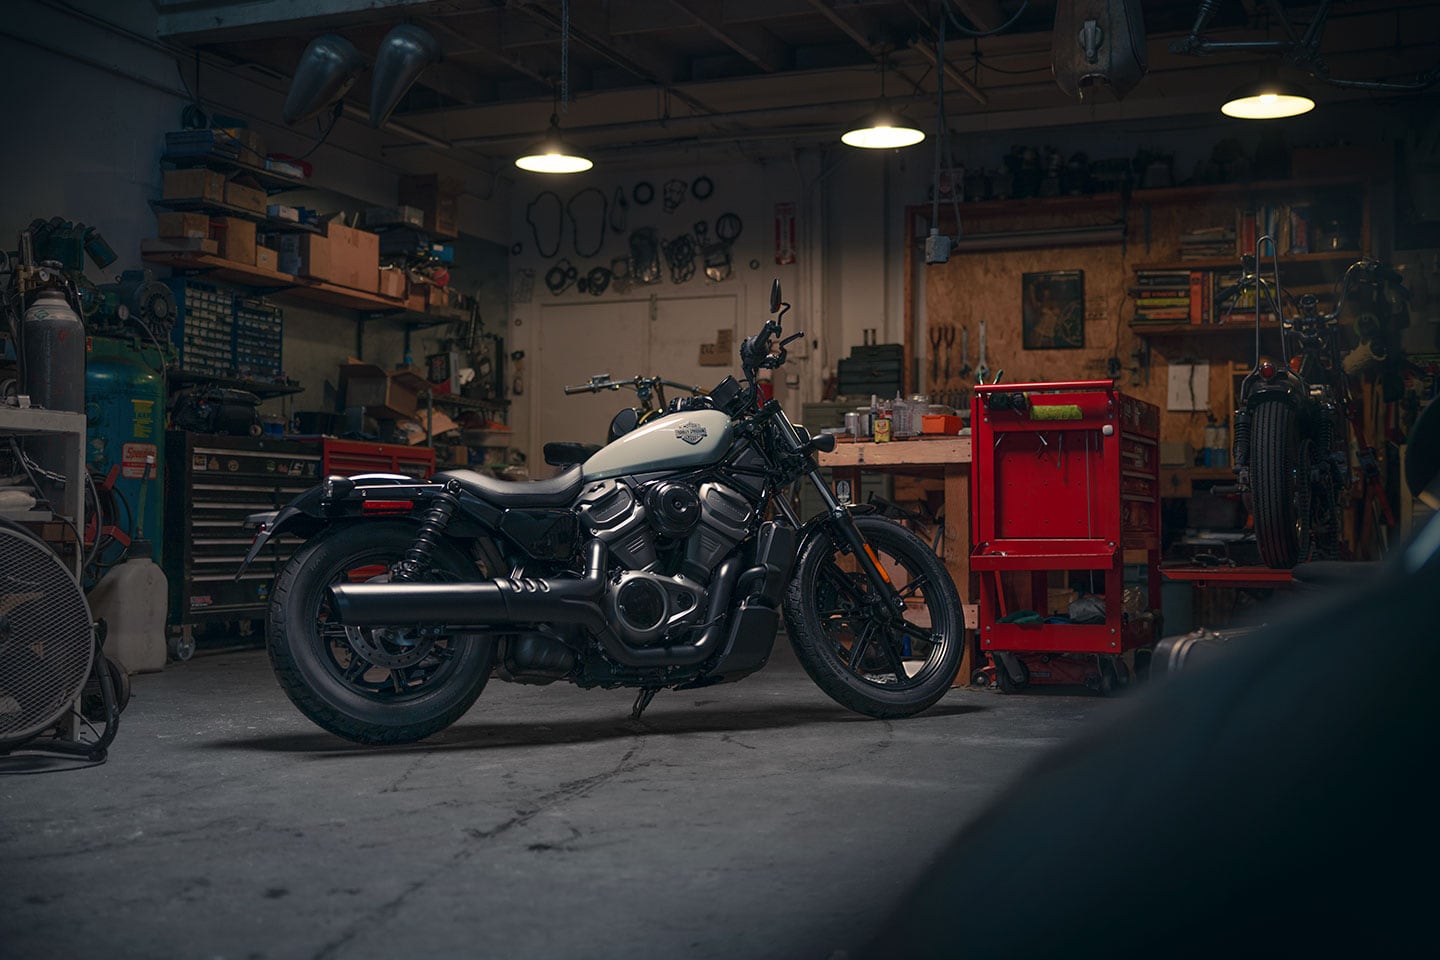 In addition to its decreased capacity, the Revolution Max 975 has new cylinders, pistons, and camshafts. It also has only one spark plug per cylinder where the Sportster S’s 1250T has two. Its four-valve heads have variable valve timing on only the intake side.